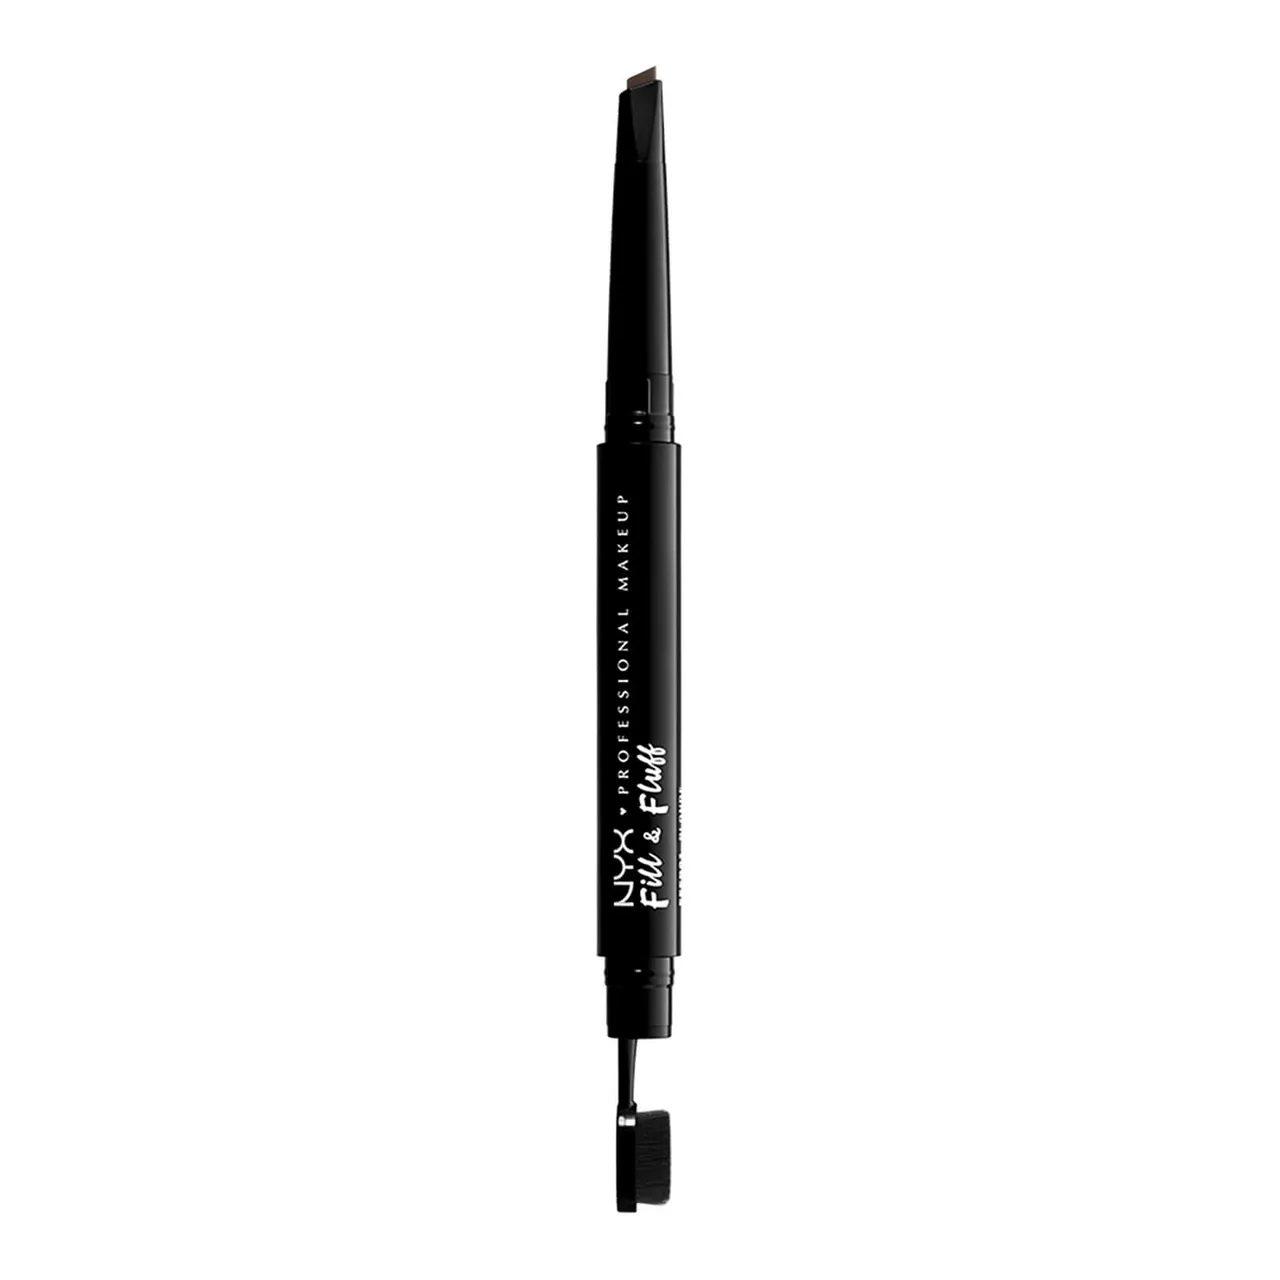 NYX Professional Makeup Fill and Fluff Eyebrow Pomade Pencil 0.2g (Various Shades) - Brunette